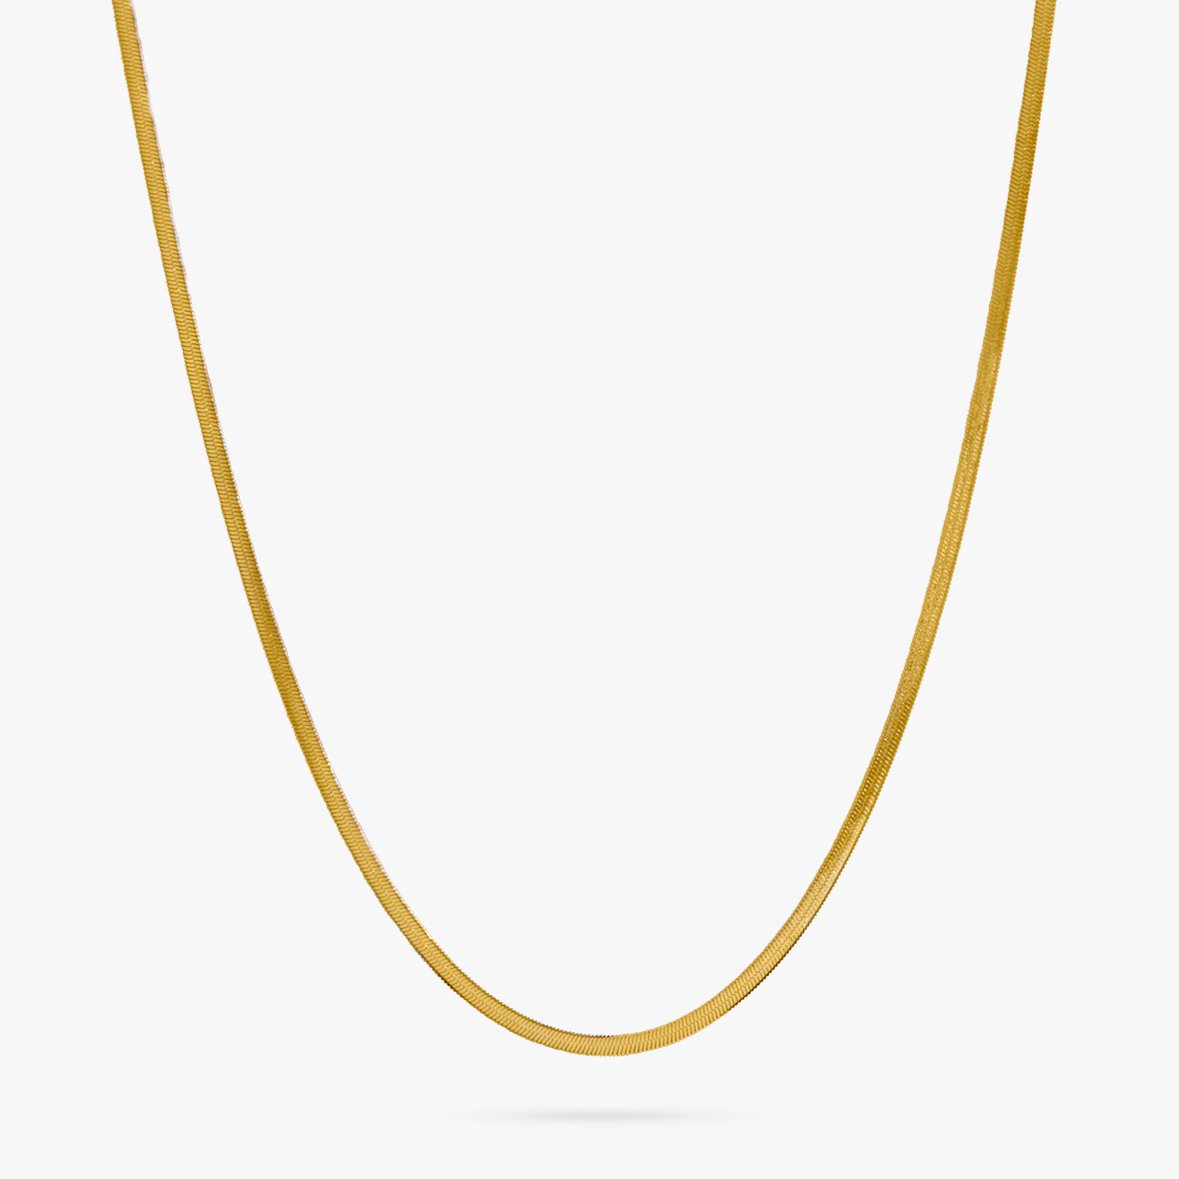 Thin Herringbone Necklace in Gold - Flaire & Co.